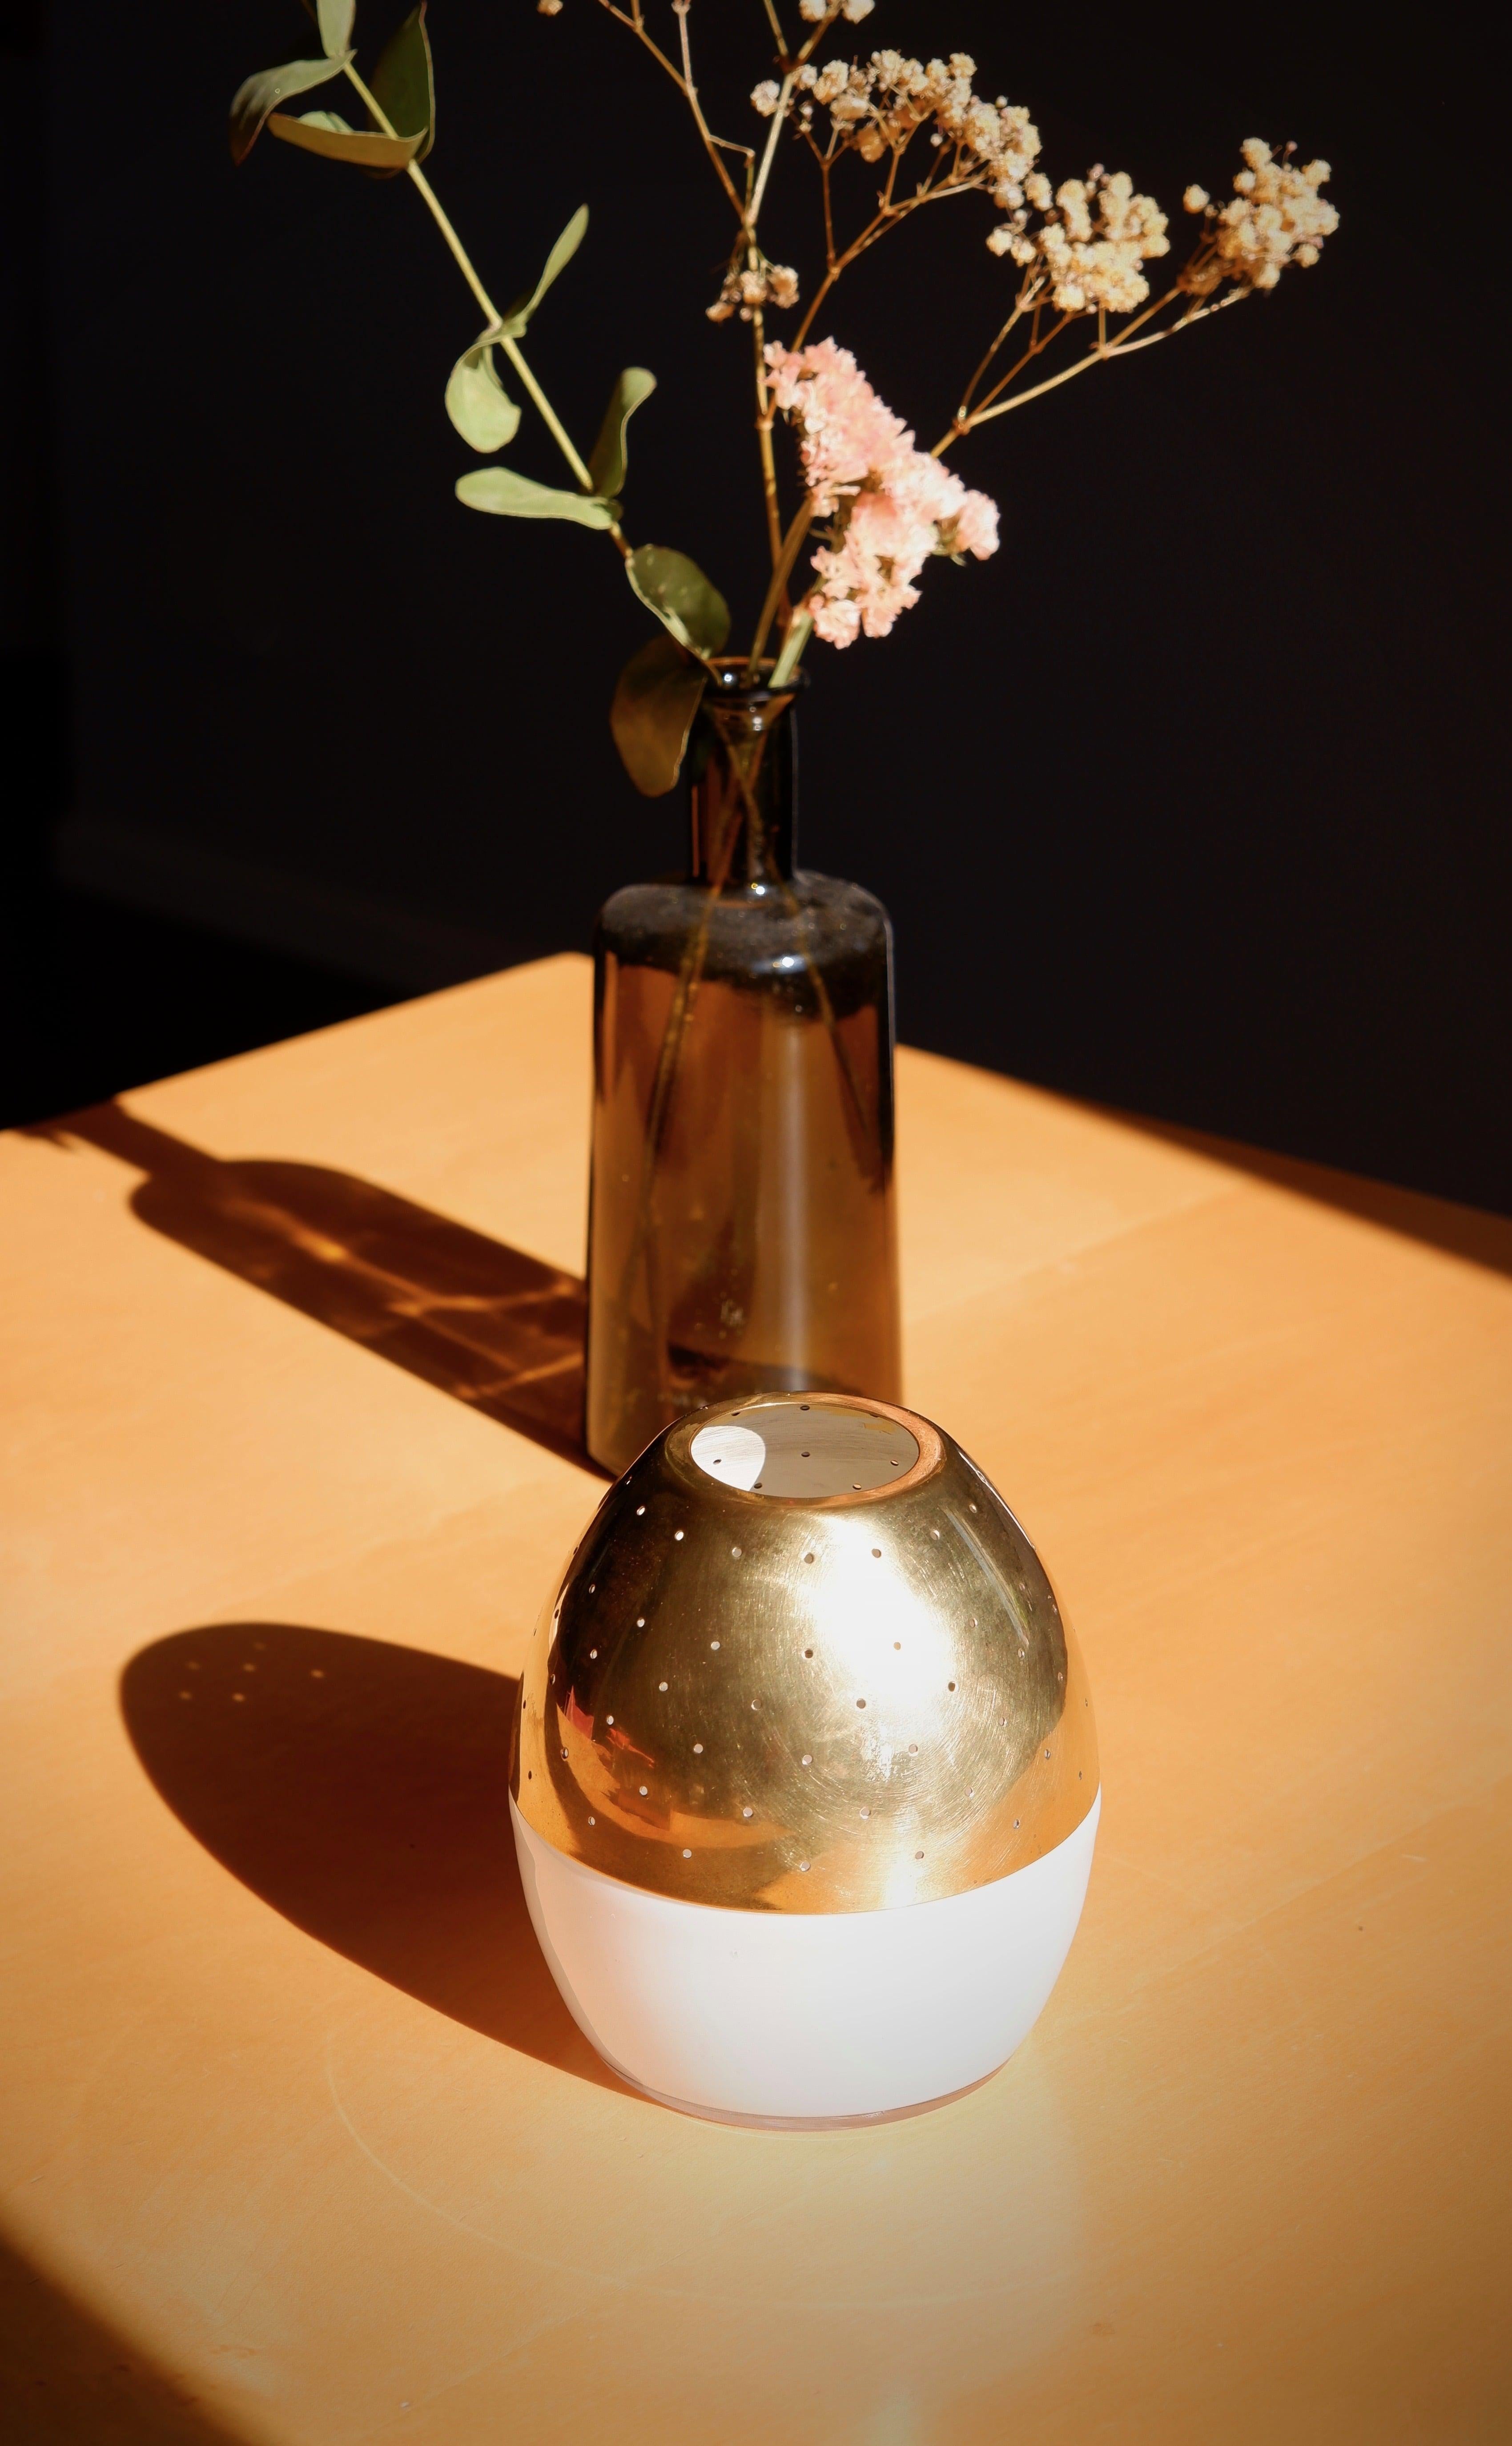 Rare and special candle lamp design by Hans agne Jakobsson in the 60's and produced in his own factory in Markaryd sweden during that same time. The candel lamp is made with a opal glass base that let the light reflect on it. It has a brass